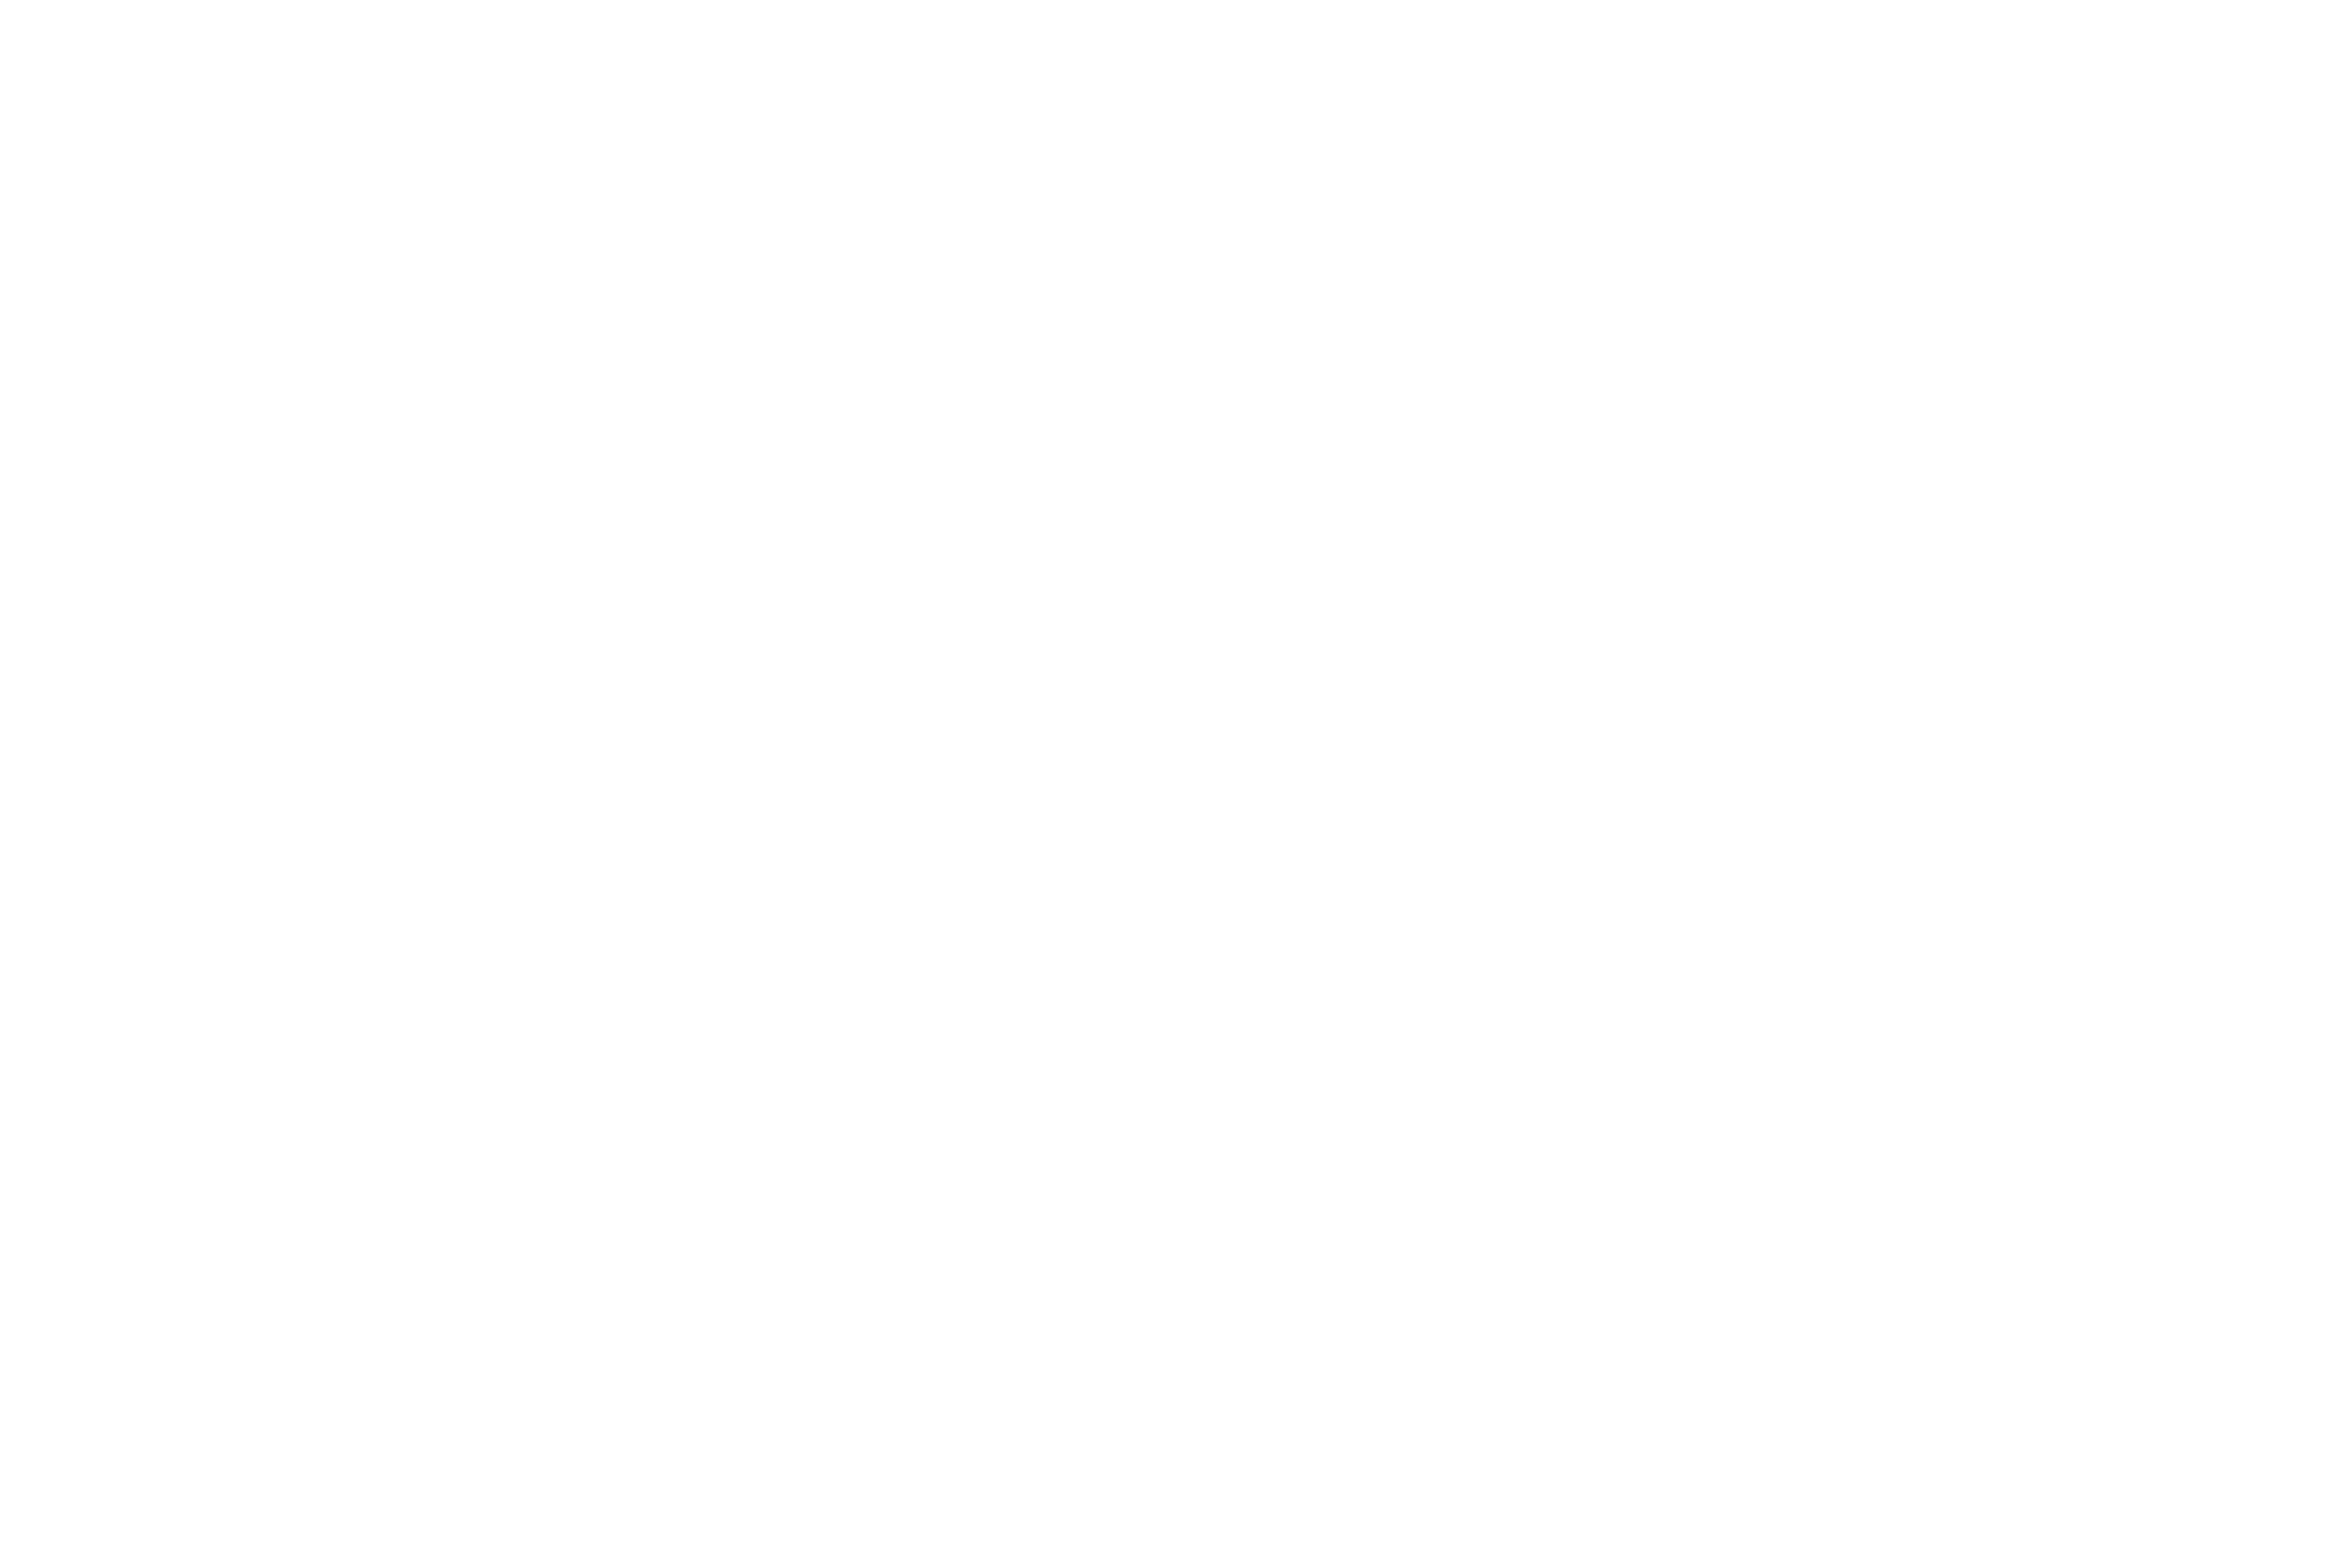 Shared Decision Making by the US Hereditary Angioedema Association